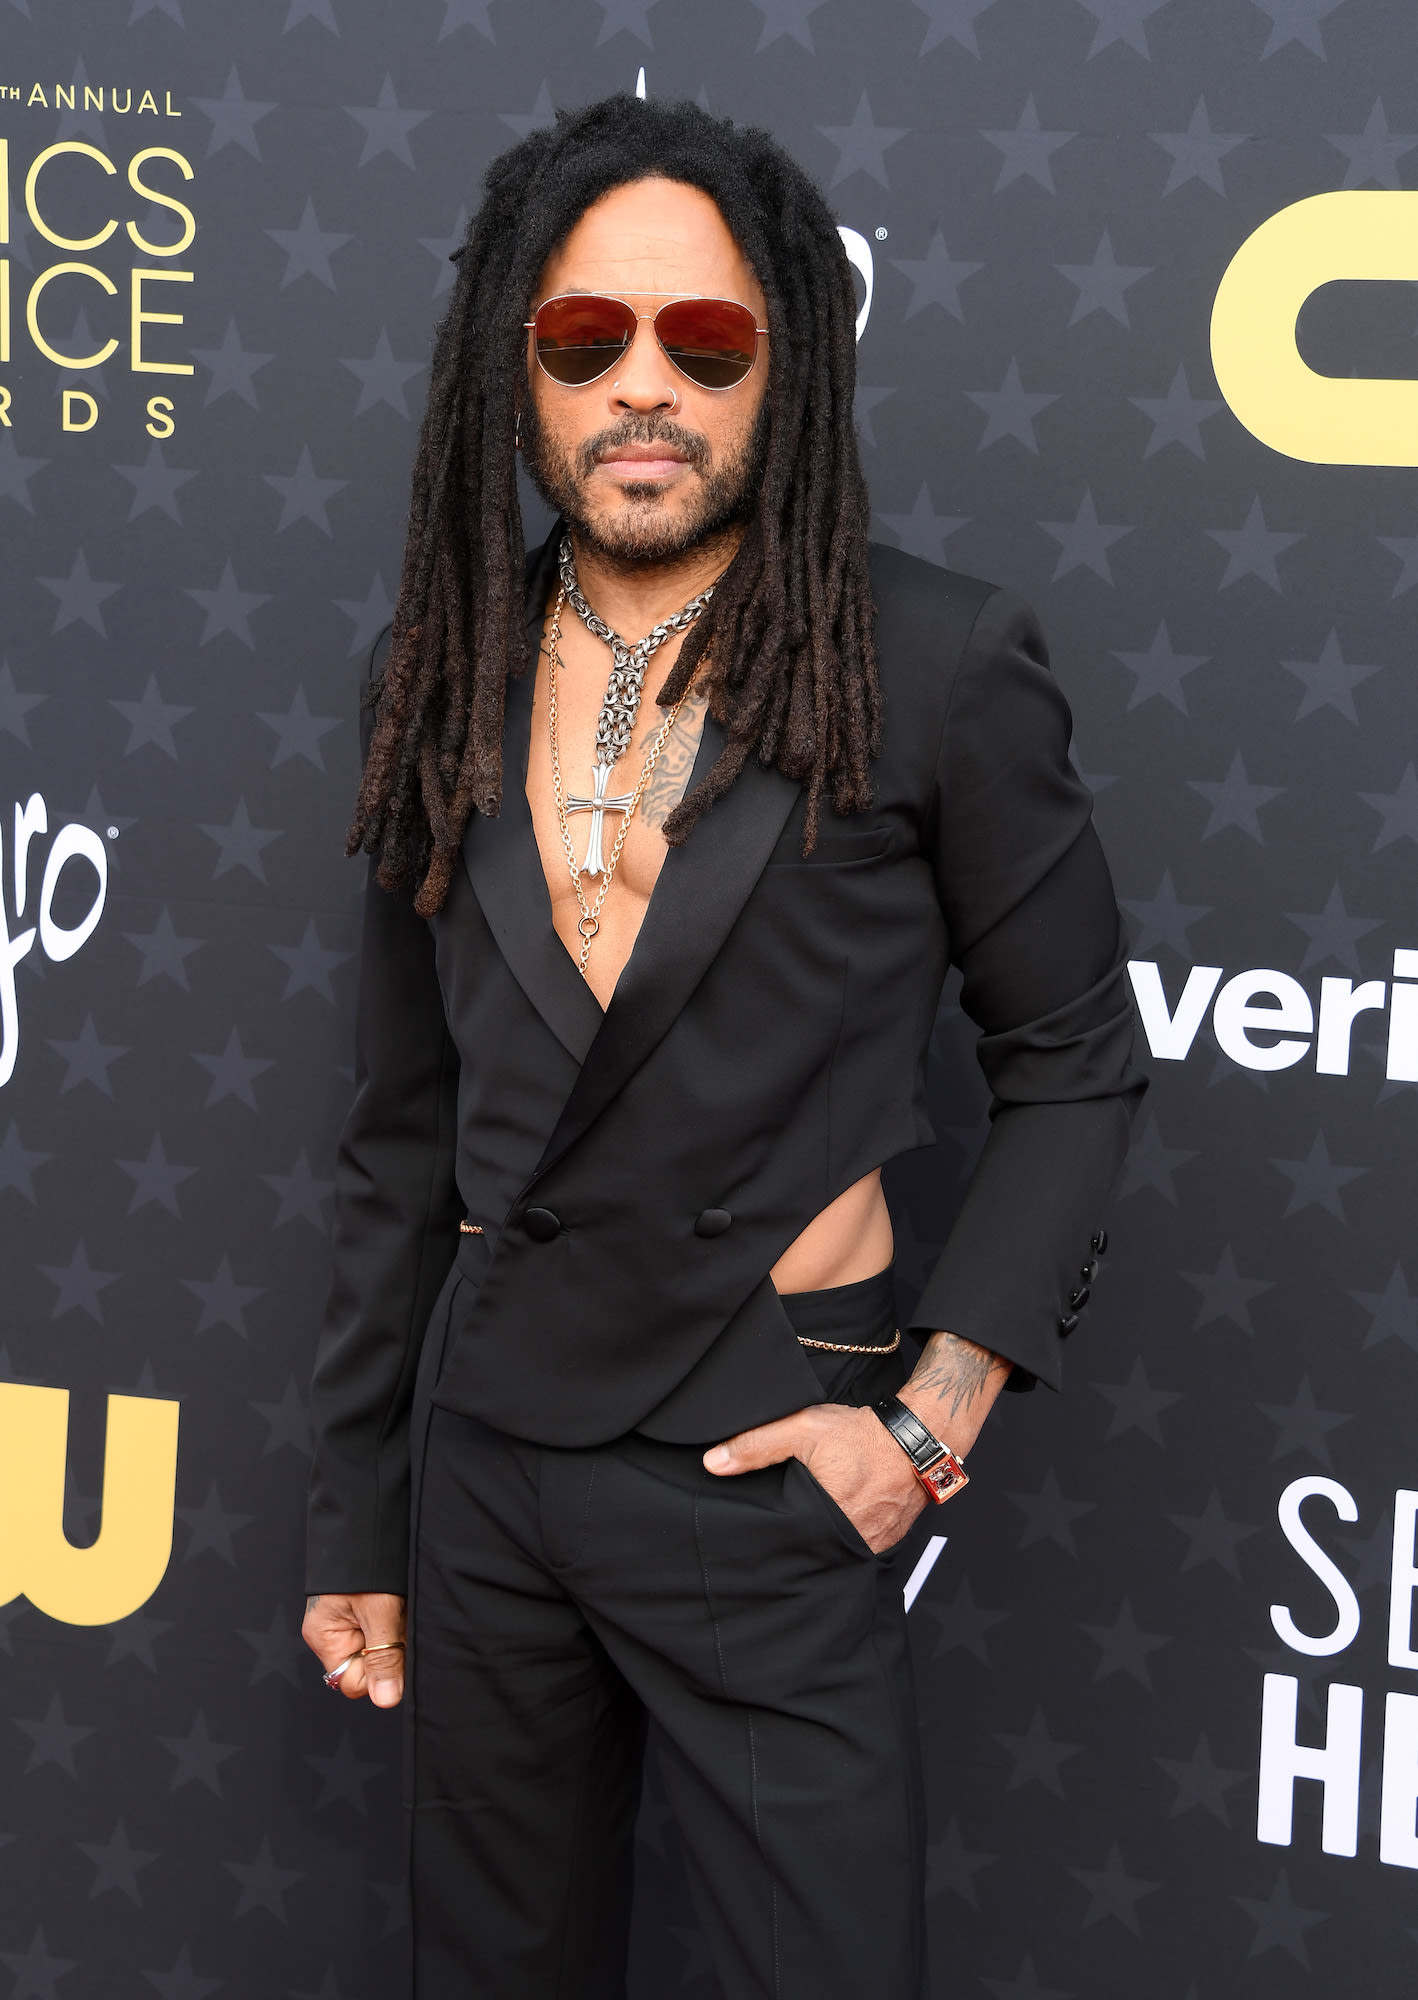 Lenny Kravitz Says He Fantasizes About Getting Married Again, Is Ready to ‘Meet the Right Person’